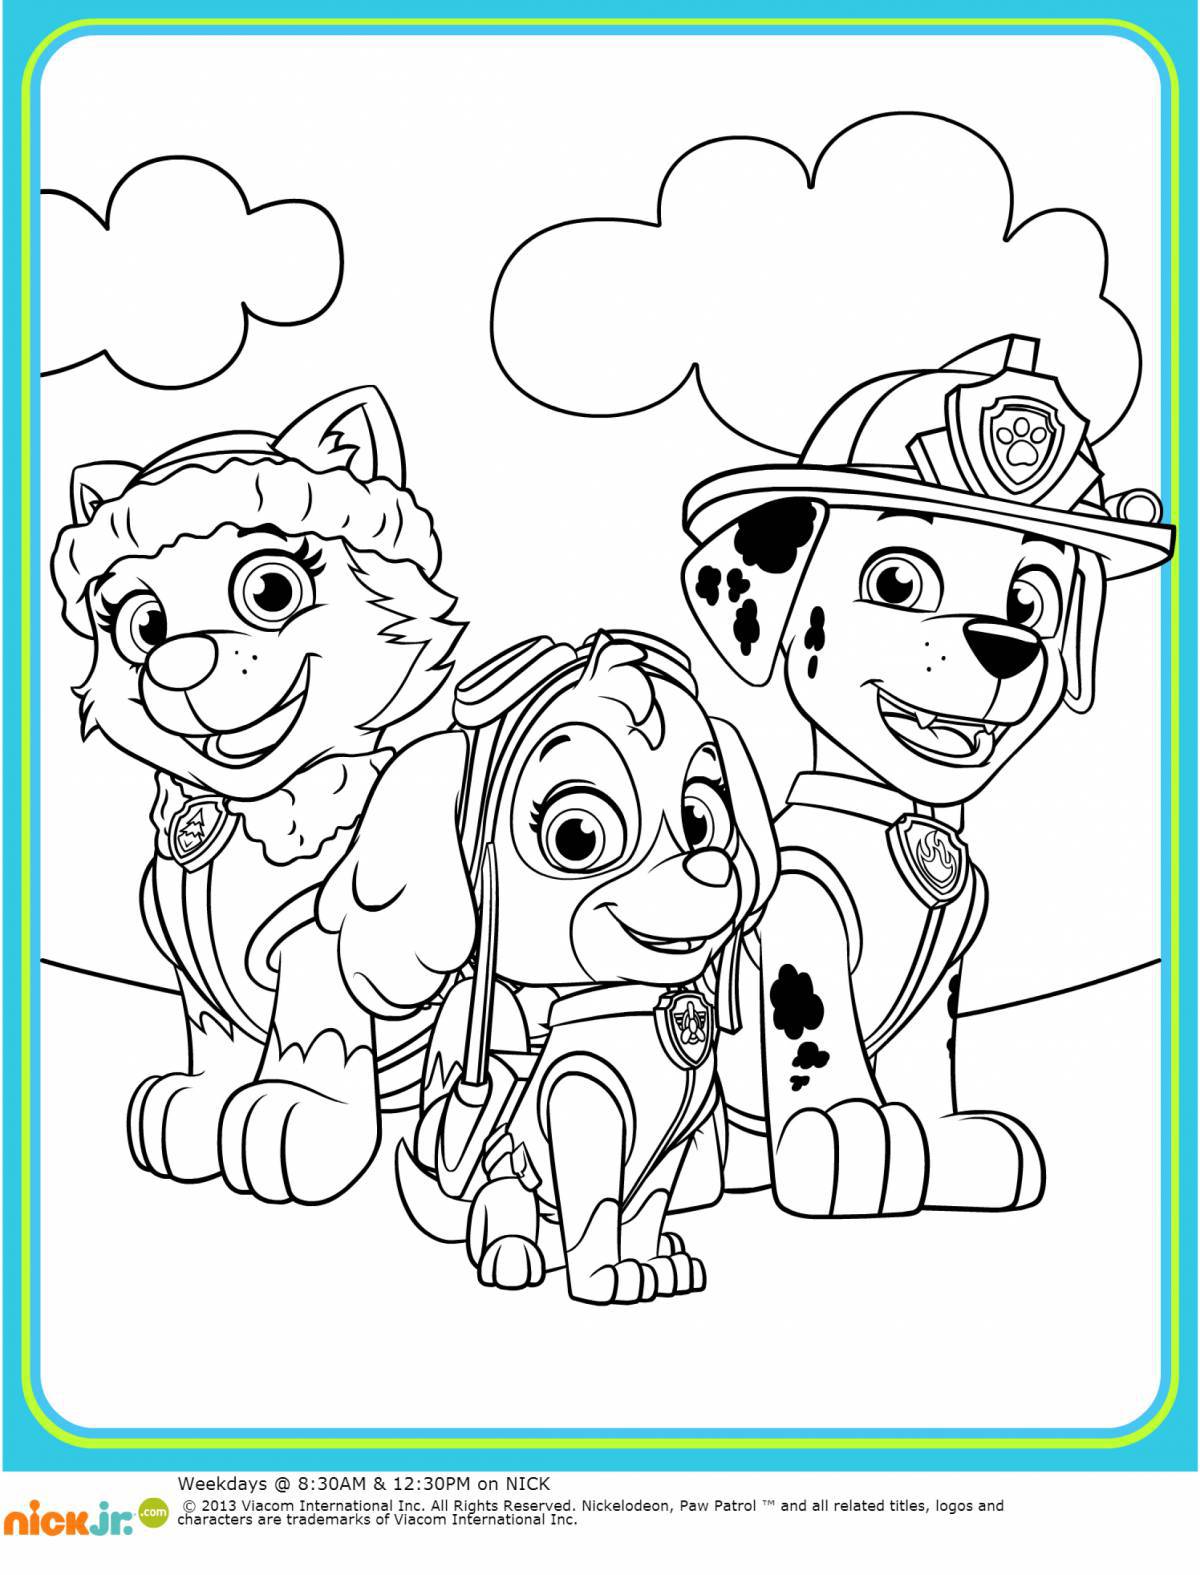 Fabulous Paw Patrol coloring book for kids